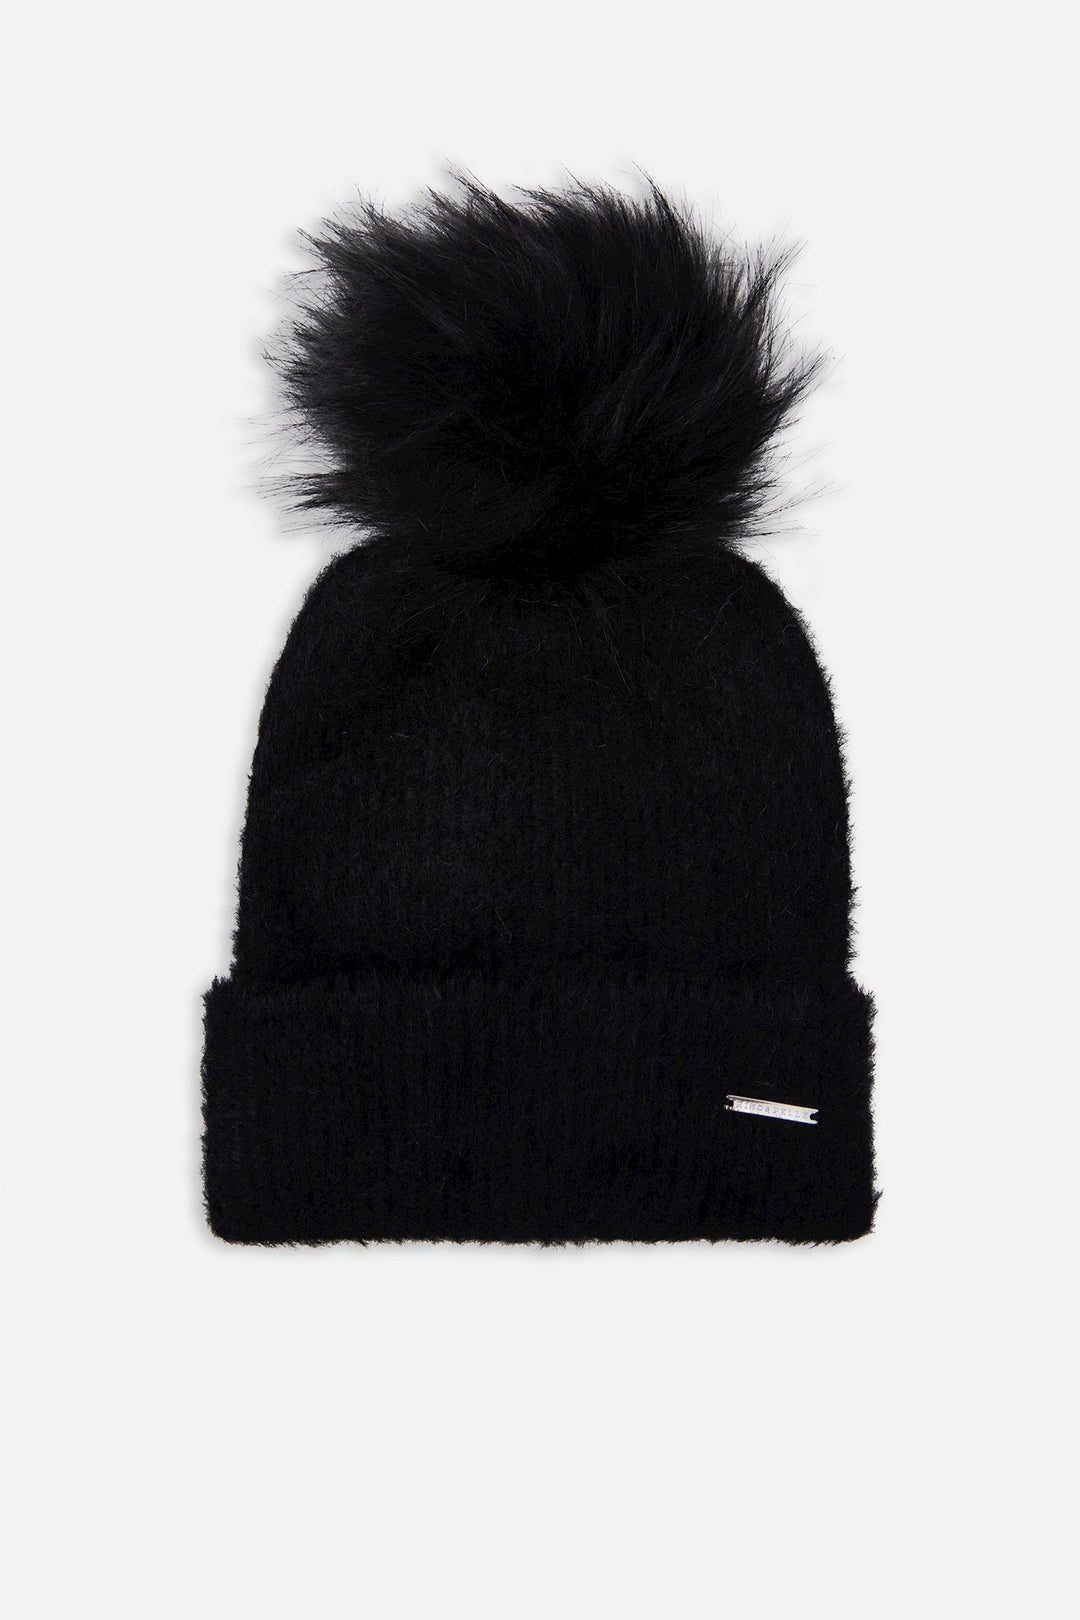 Rino & Pelle Caso Knitted Beanie with Pom Pom | Dotique